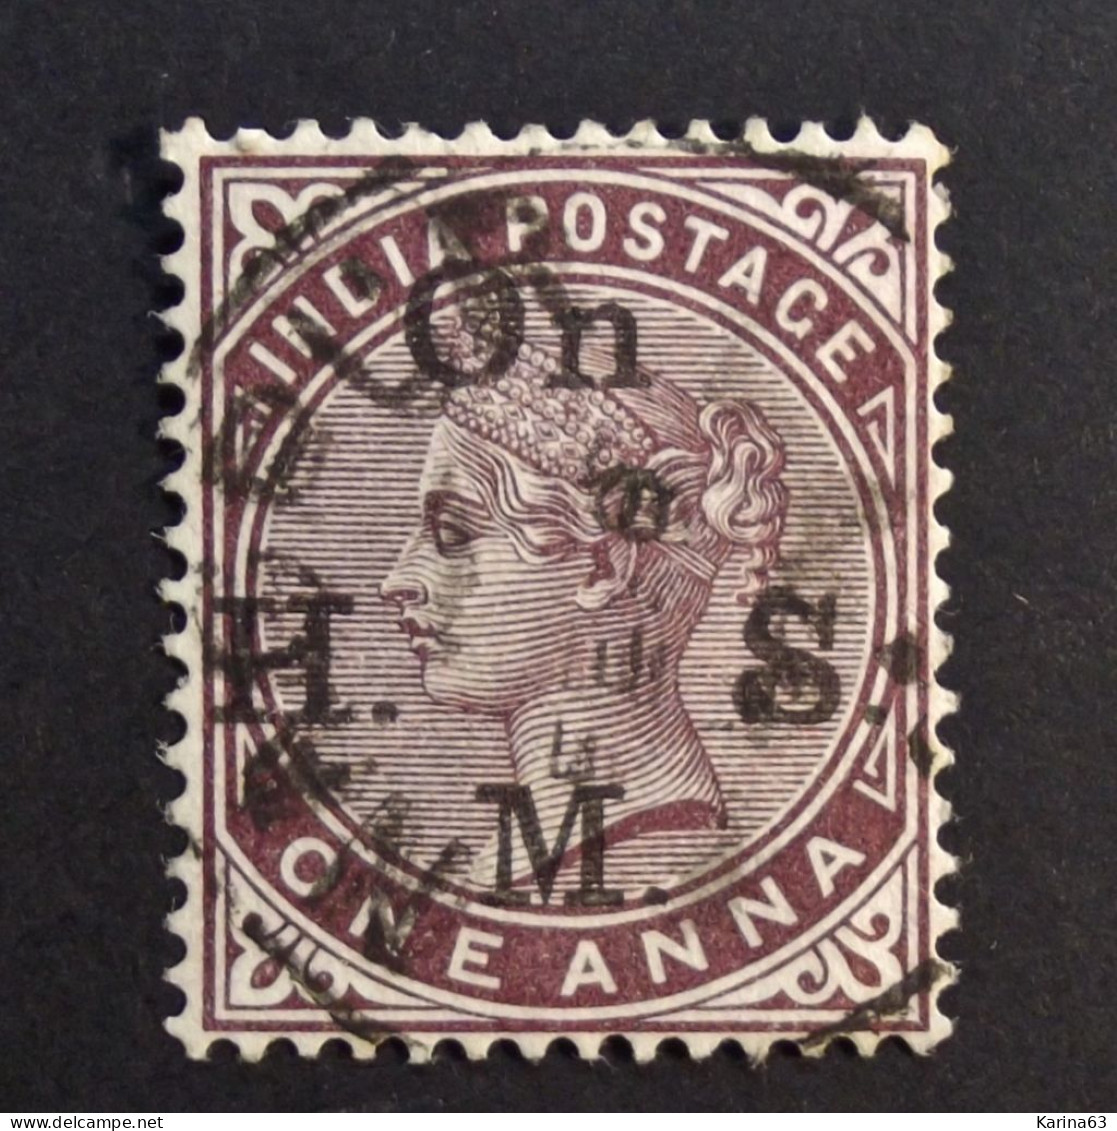 India - East India  -  Queen Victoria  -  On H M S - Watermark - One Anna - Cancelled - 1854 East India Company Administration